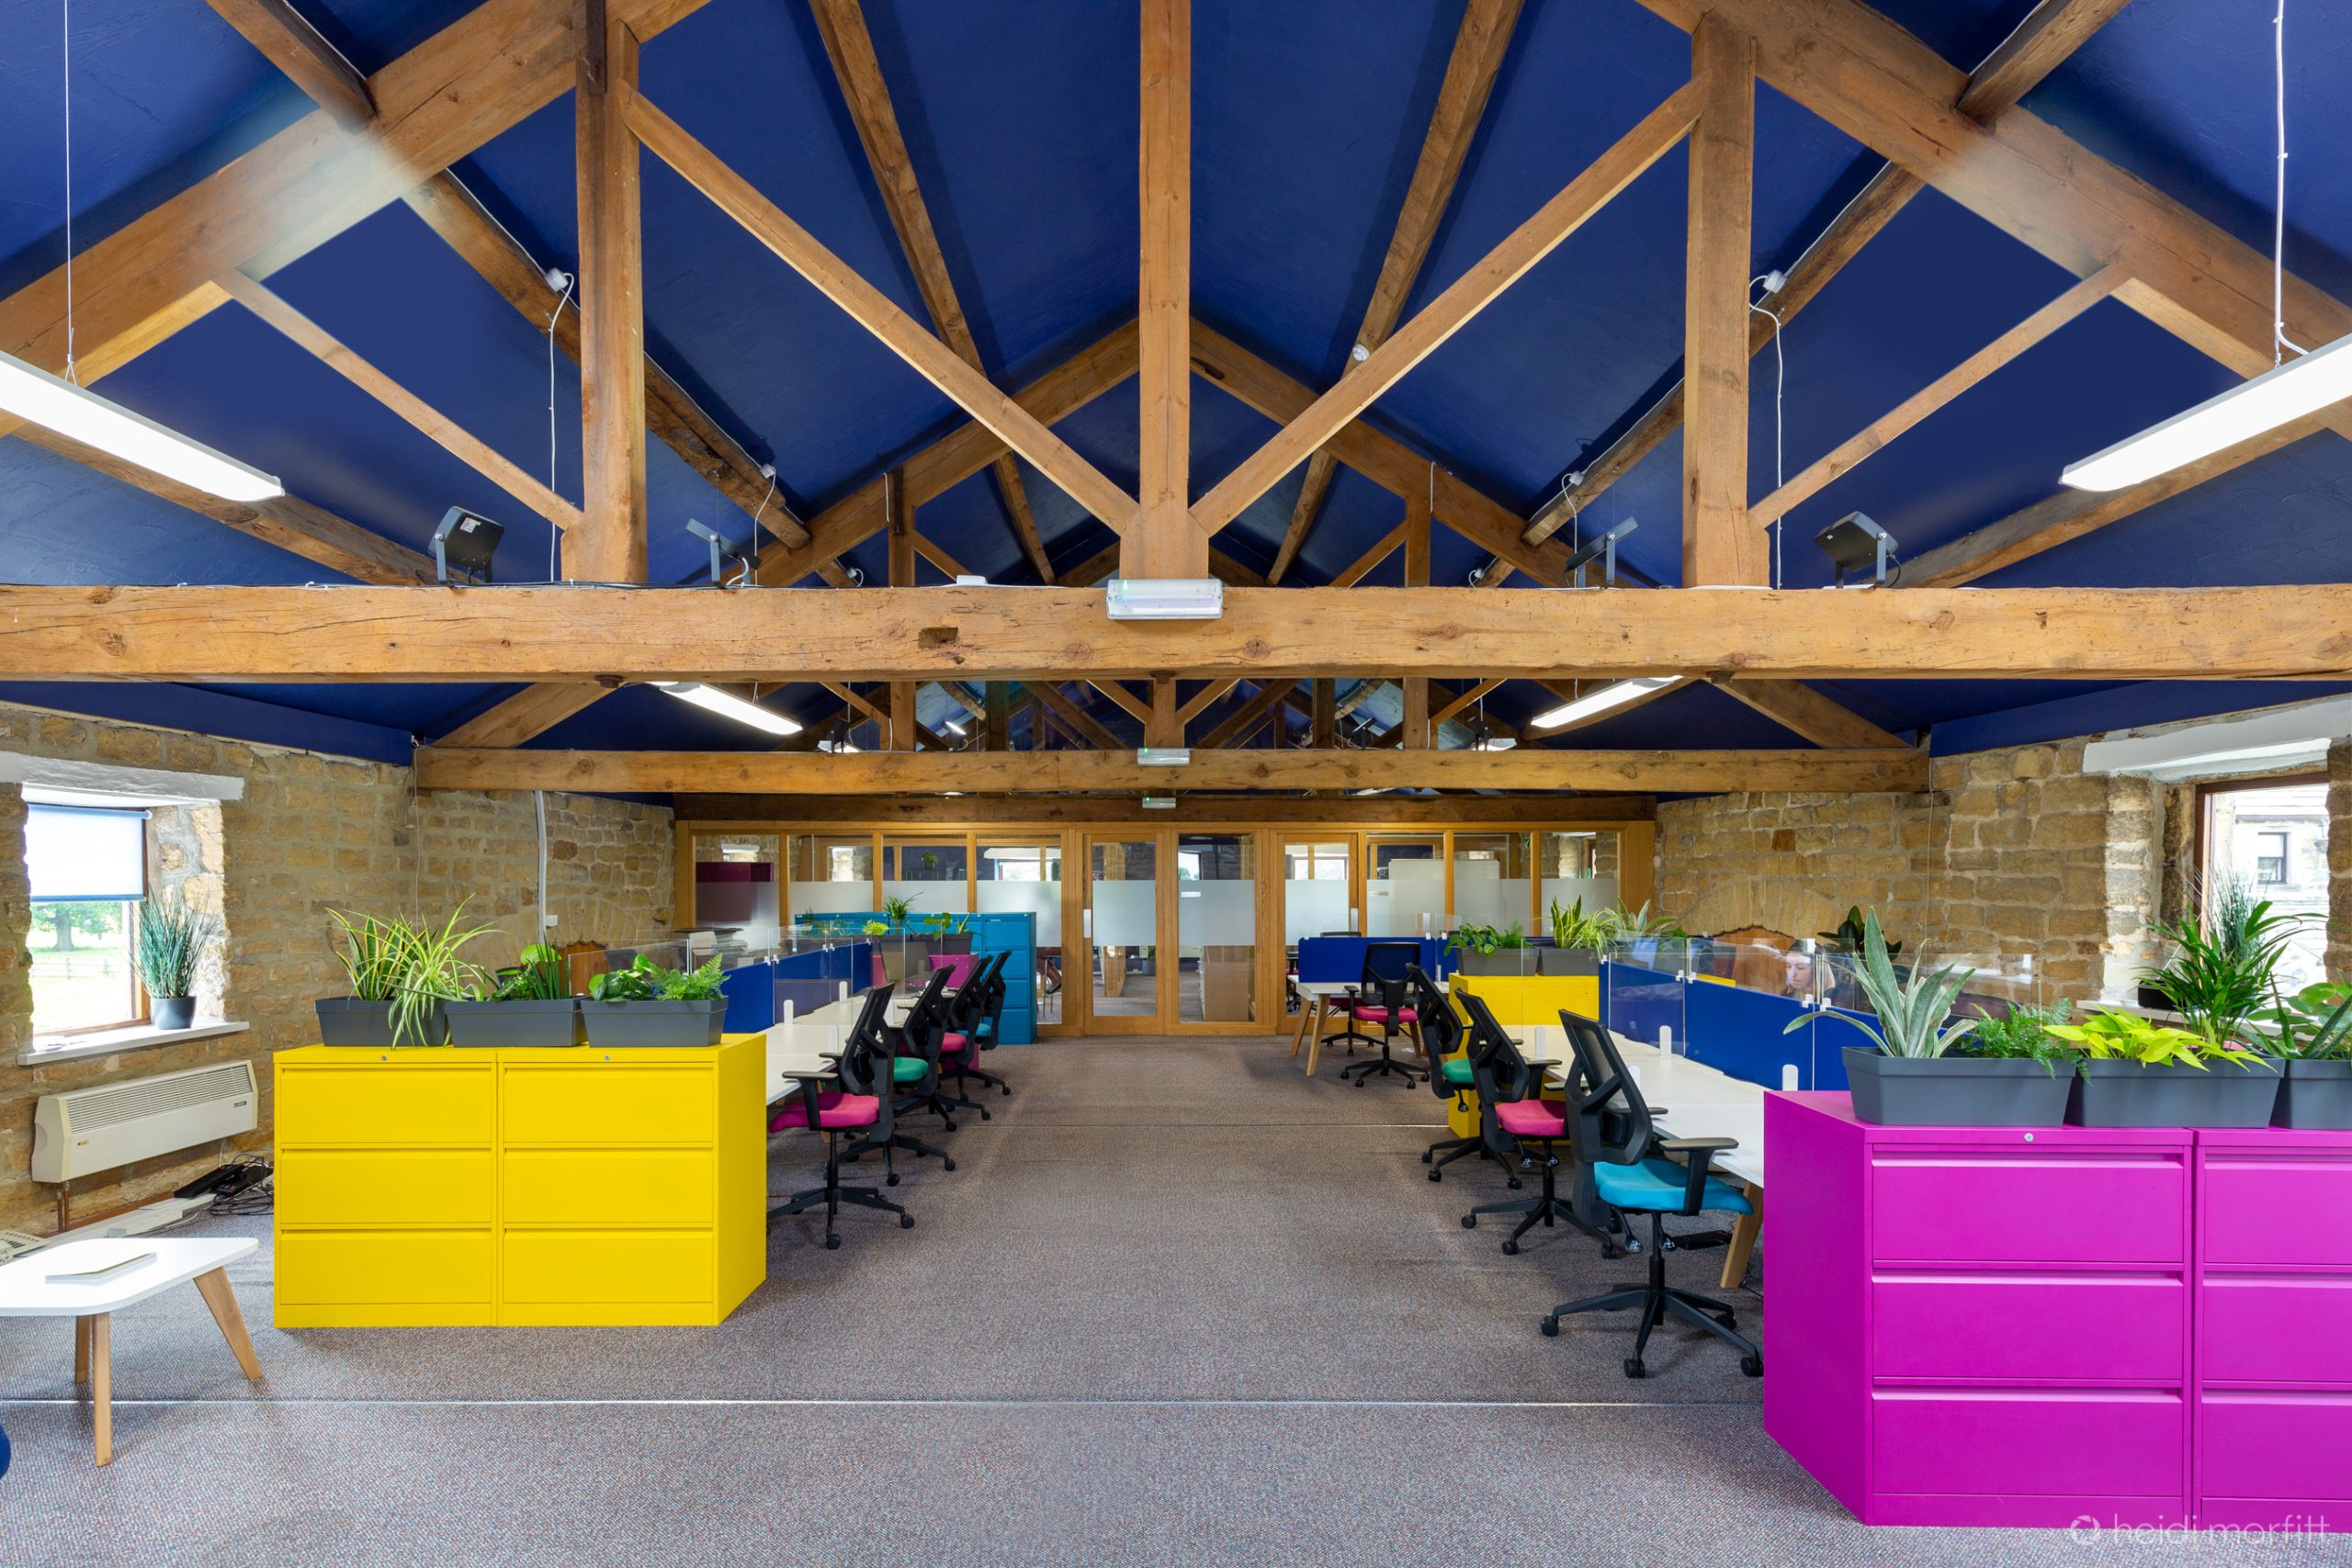 Office in a barn conversion with two banks of desks and office chairs. Lots of colour - a navy ceiling, brightly coloured cabinets and drawers in hot pink and a vibrant yellow